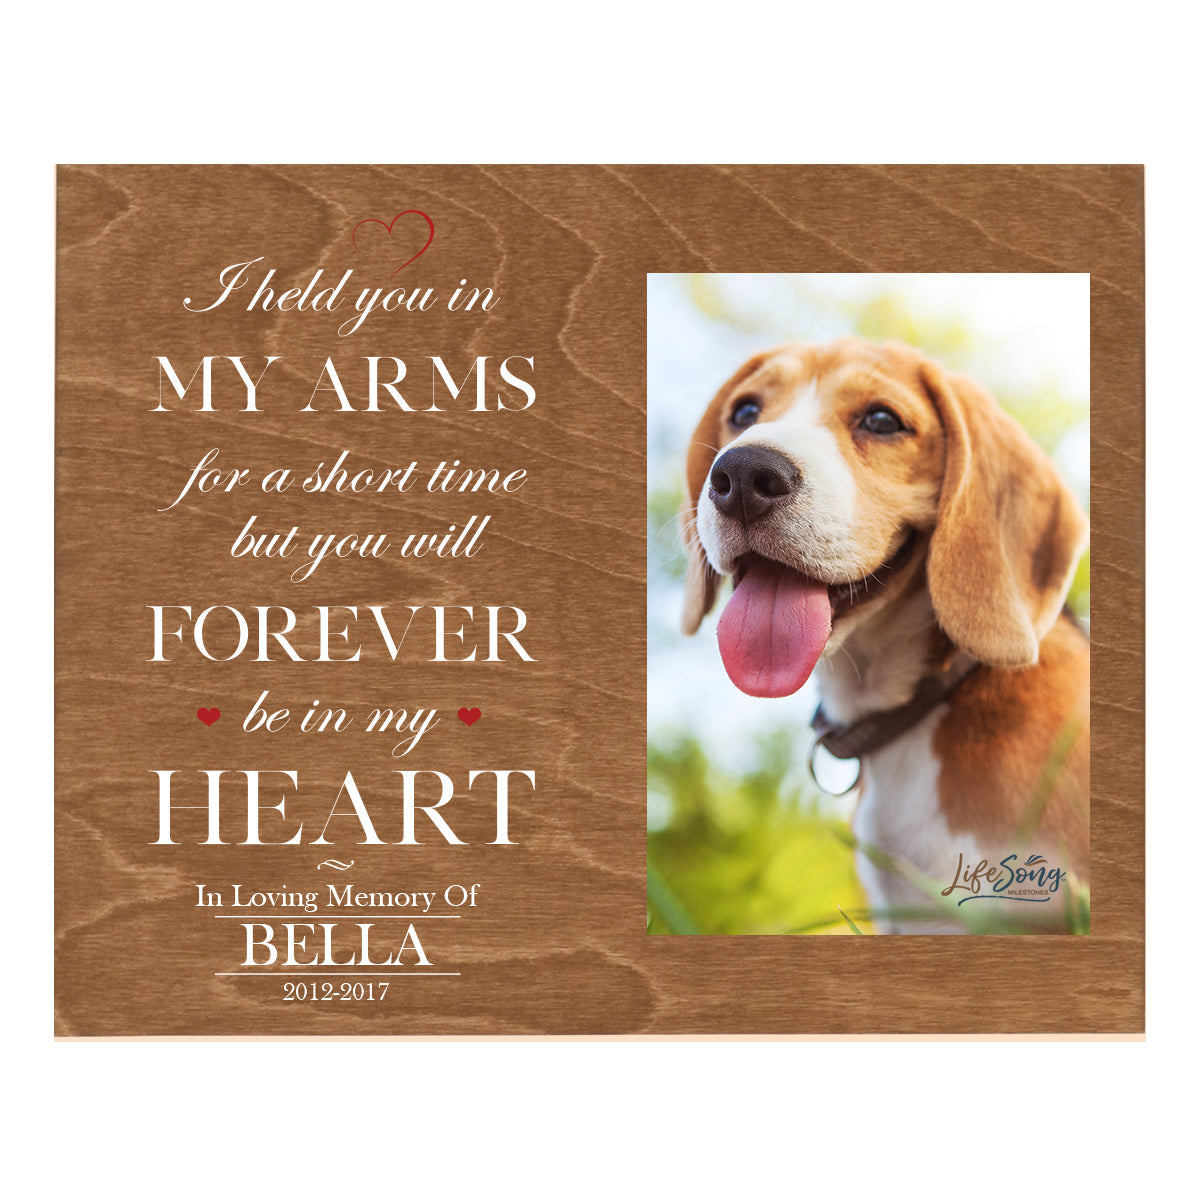 Pet Memorial Photo Wall Plaque Décor - I Held You In My Arms